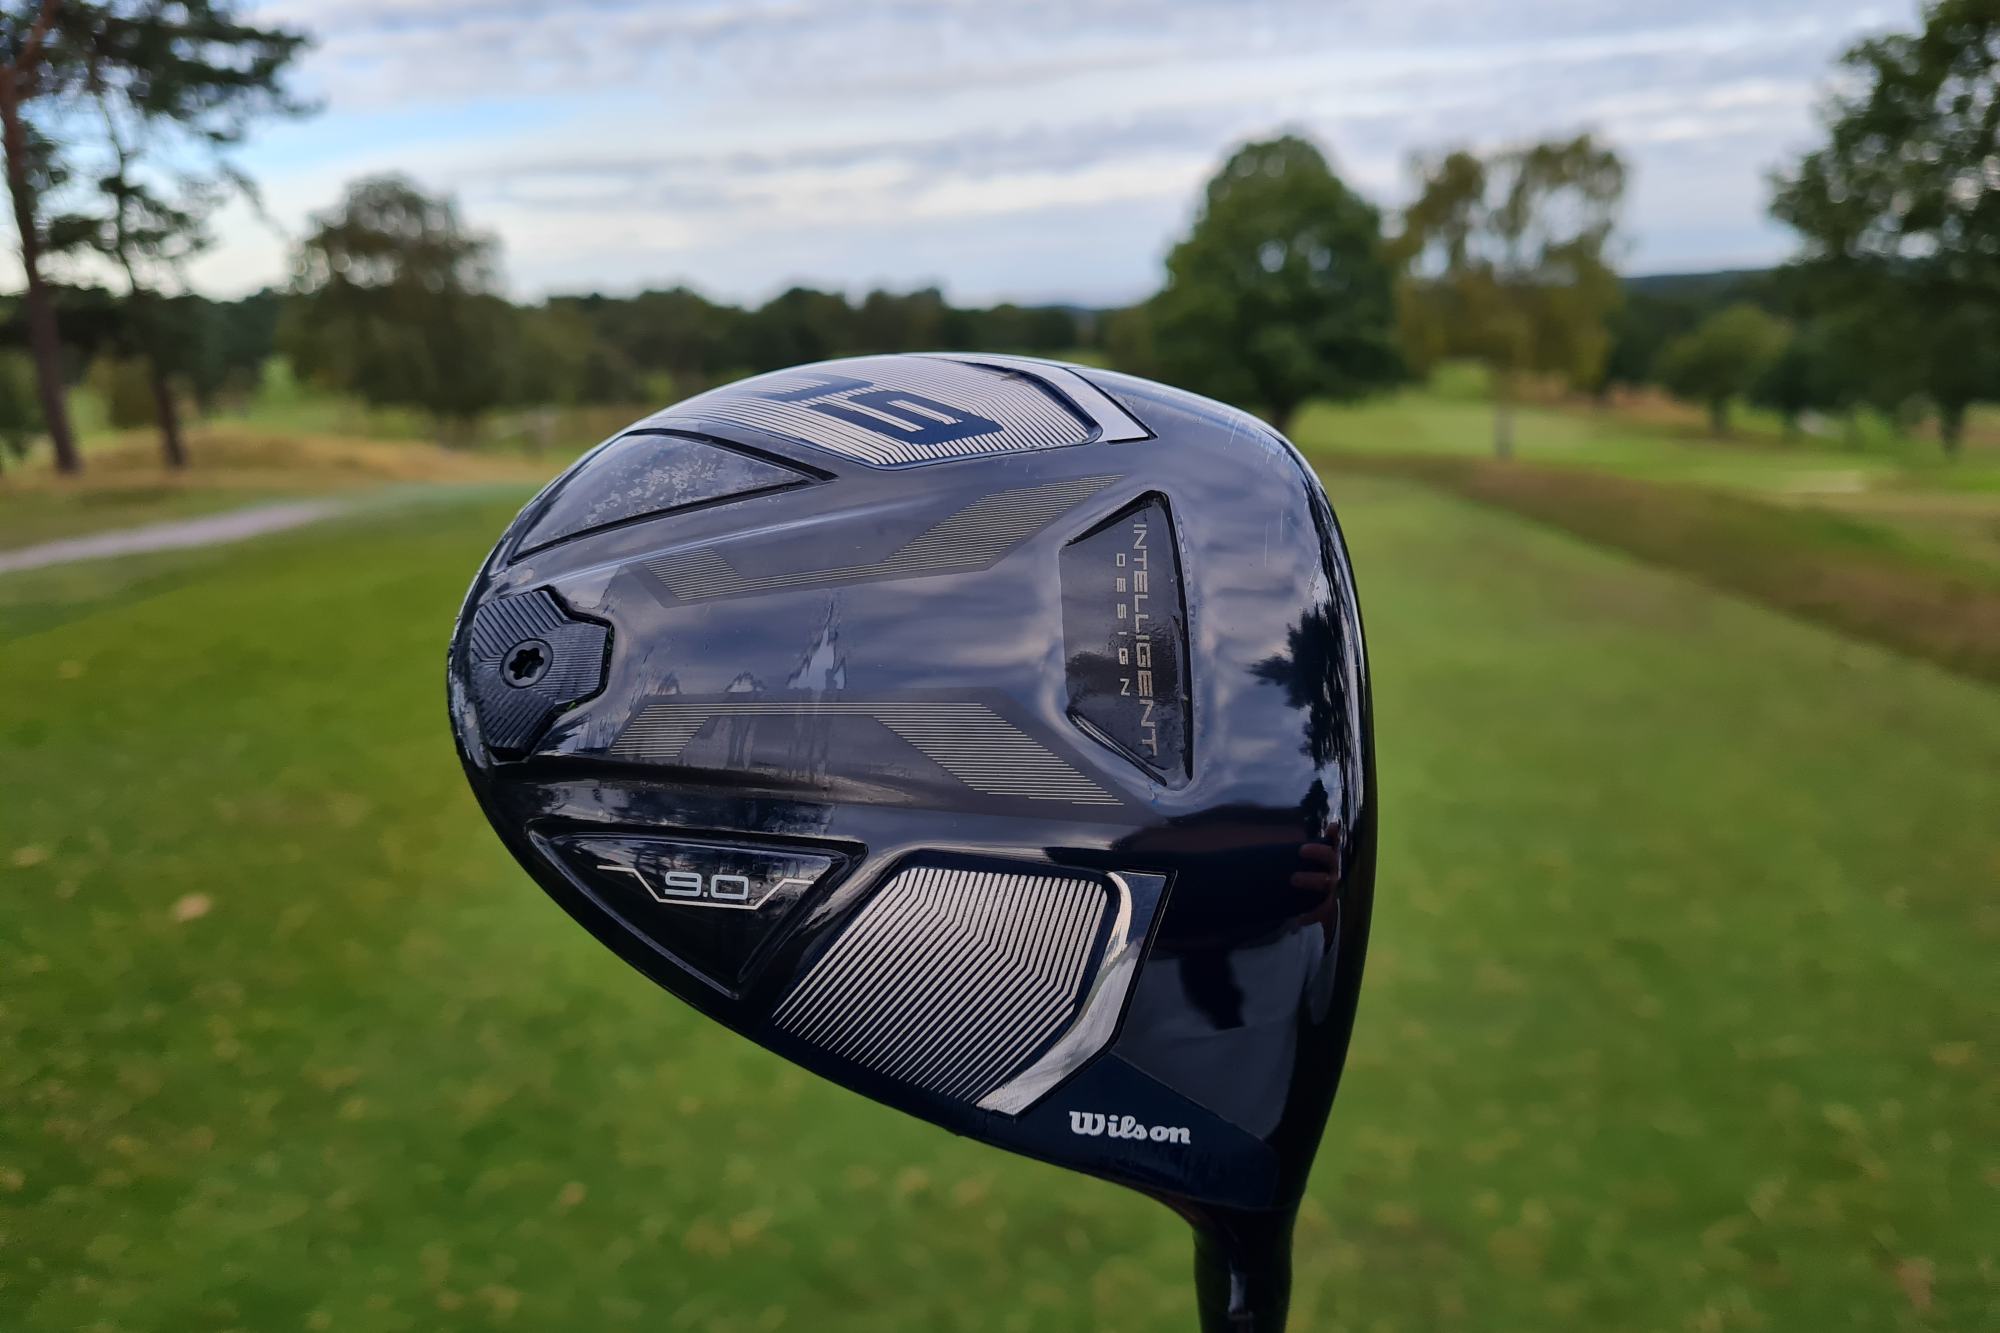 D9 driver review: How does perform? - National Club Golfer